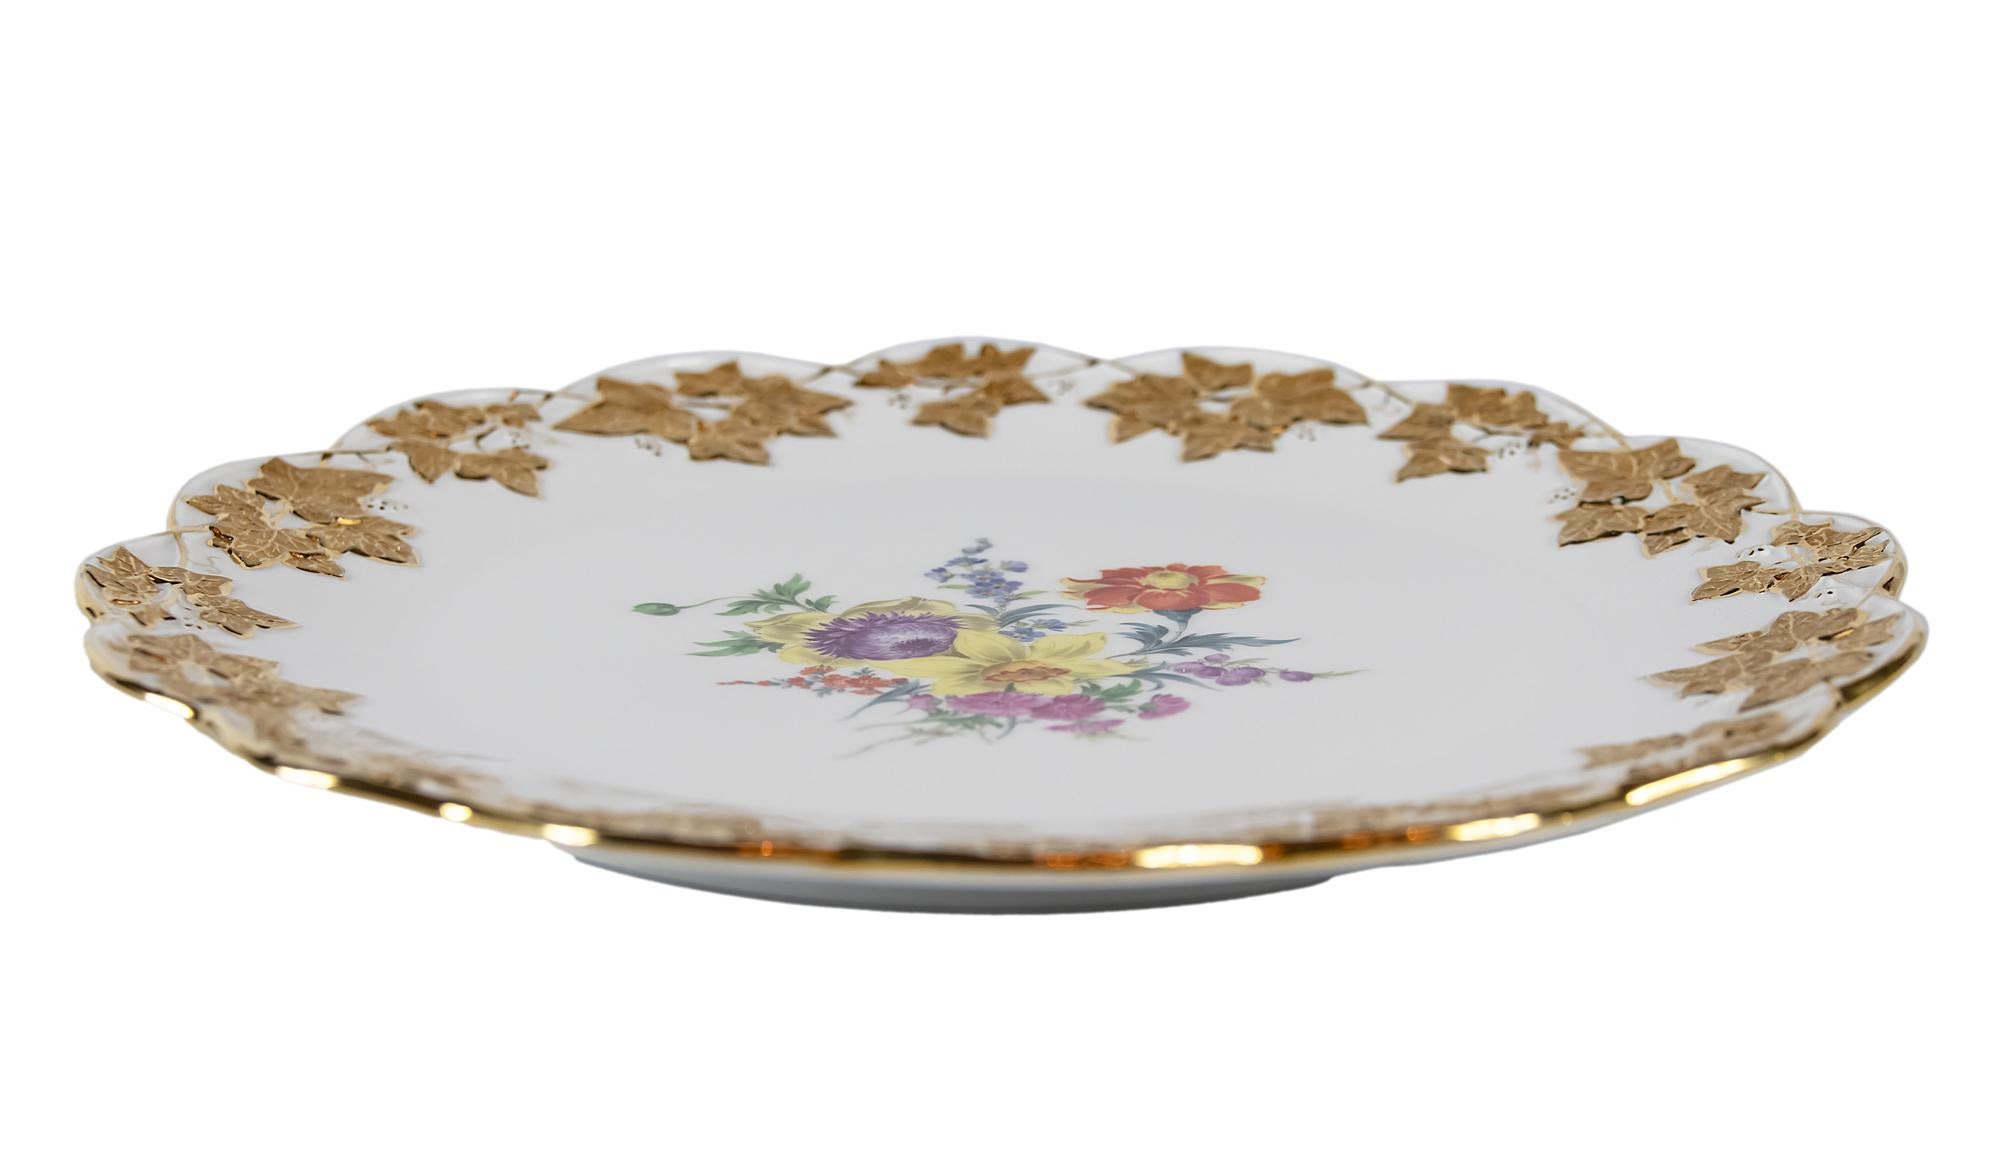 Large Meissen porcelain plate with hand painted floral motives and gold decor.